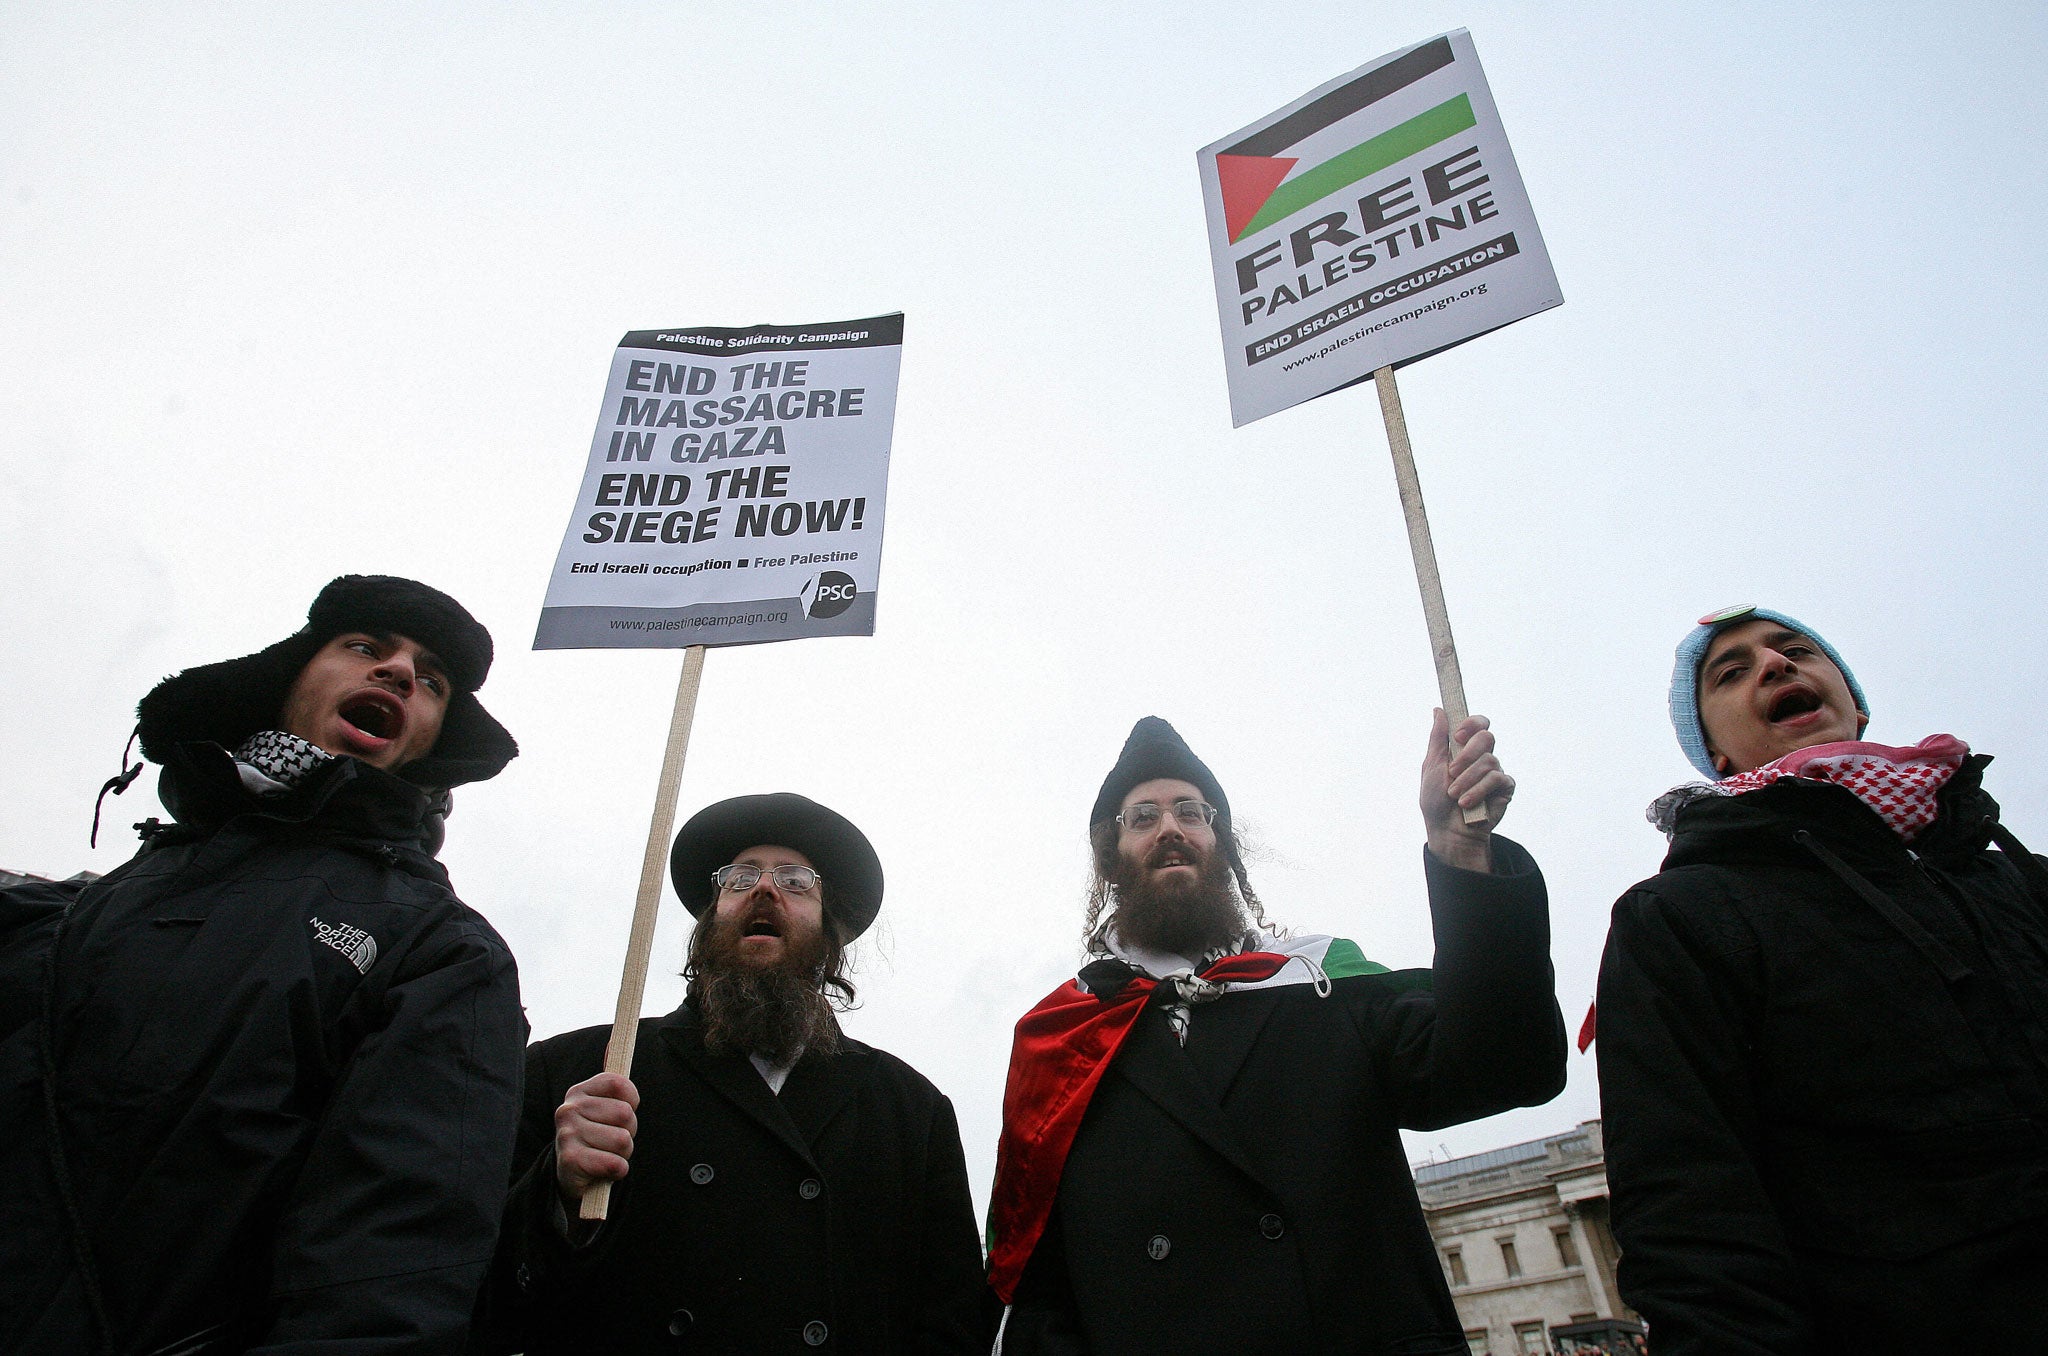 Orthodox Jews (C) protest at a demonstration in Trafalgar Square, London on January 17, 2009. Thousands of protesters calling for Israel to stop its offensive in the Gaza Strip rallied in European cities. In London, some 3,500 people filled Trafalgar Square, police said, for a protest billed as a 'demonstration against Israel's barbarity and war crimes'.